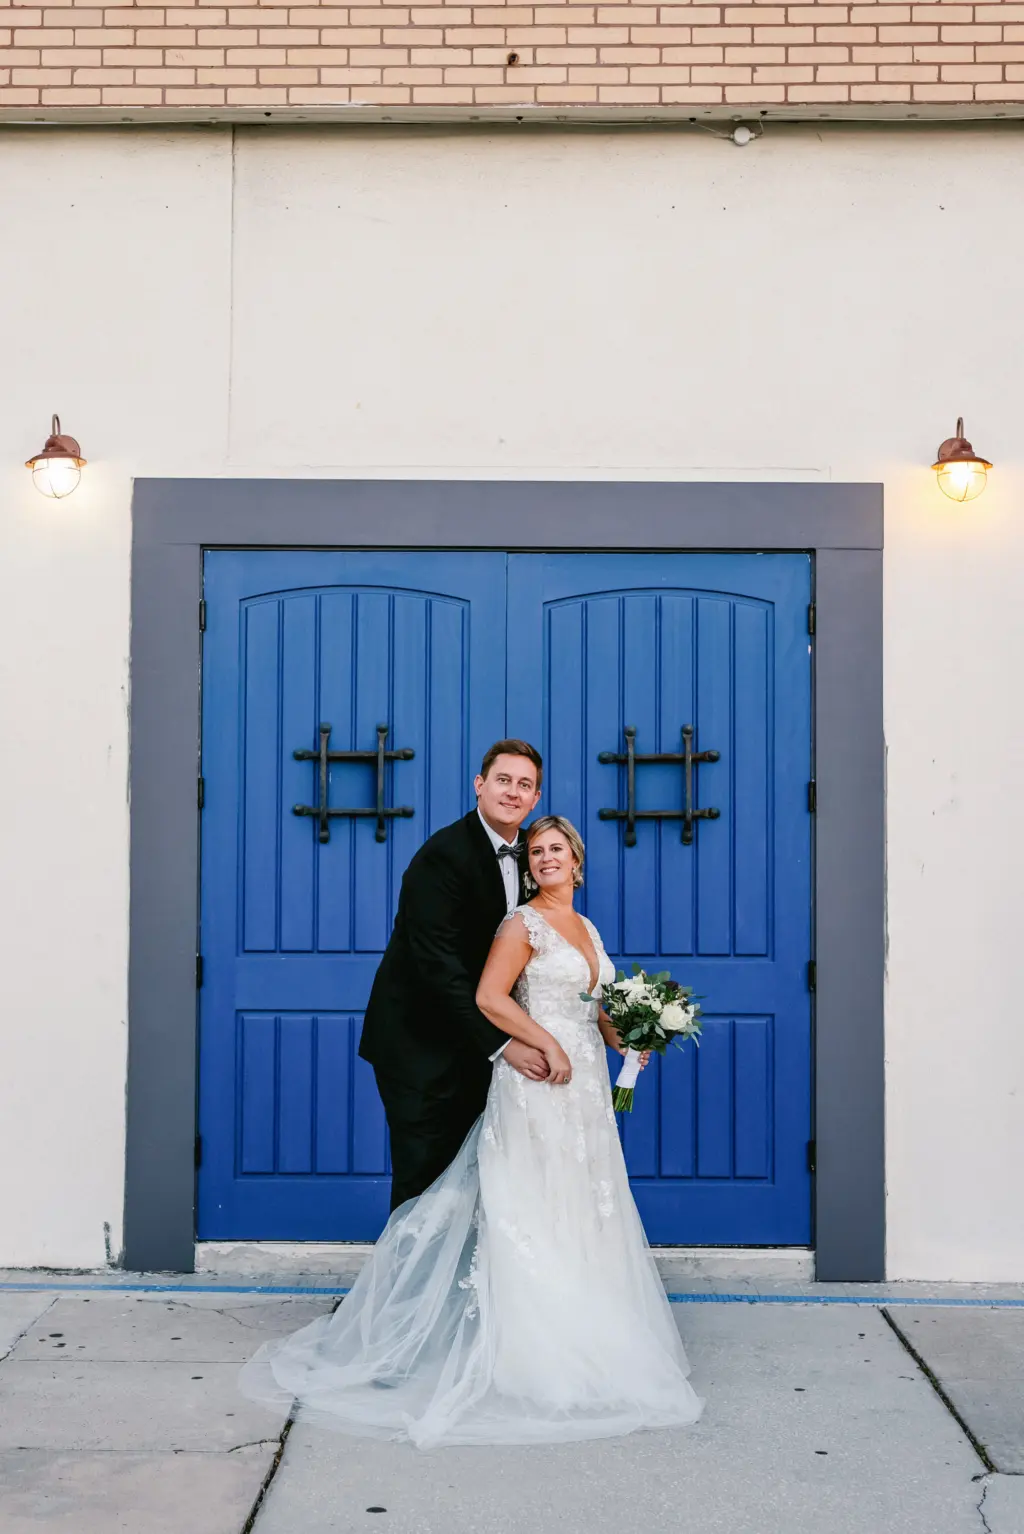 Bride and Groom Just Married Wedding Portrait | Downtown Tampa Heights Event Venue The Rialto Theatre